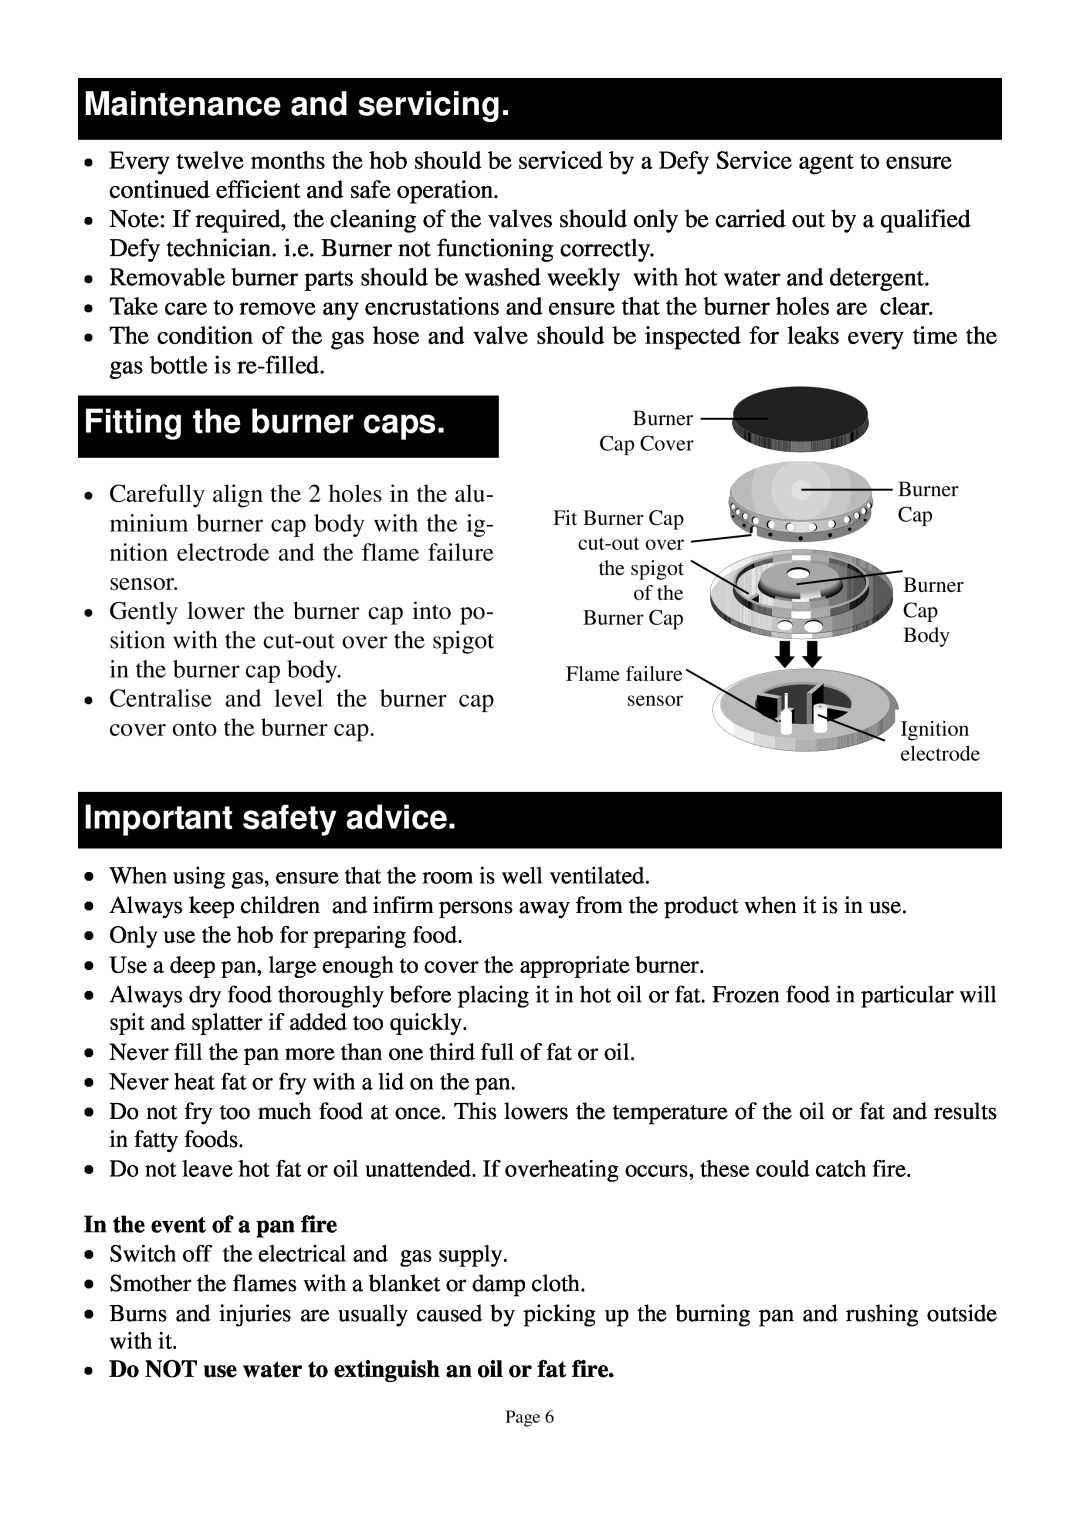 Defy Appliances DGS 123, DGS 122 owner manual Maintenance and servicing, Fitting the burner caps, Important safety advice 